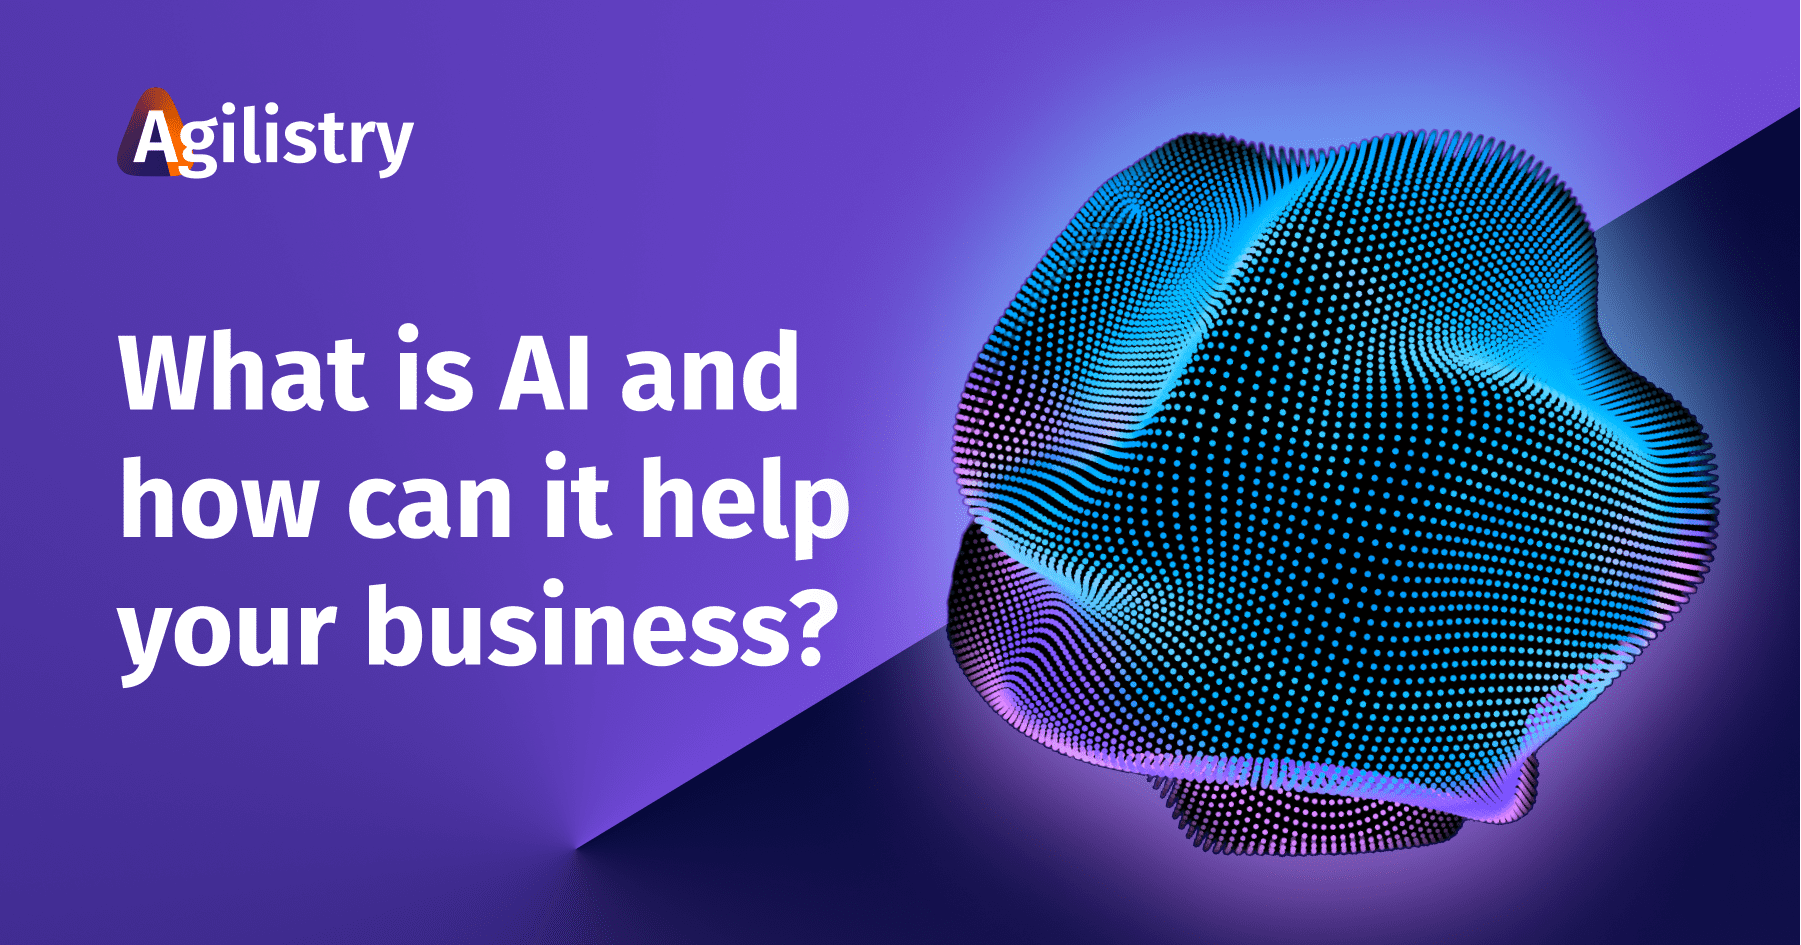 What is AI and how can it help your business?